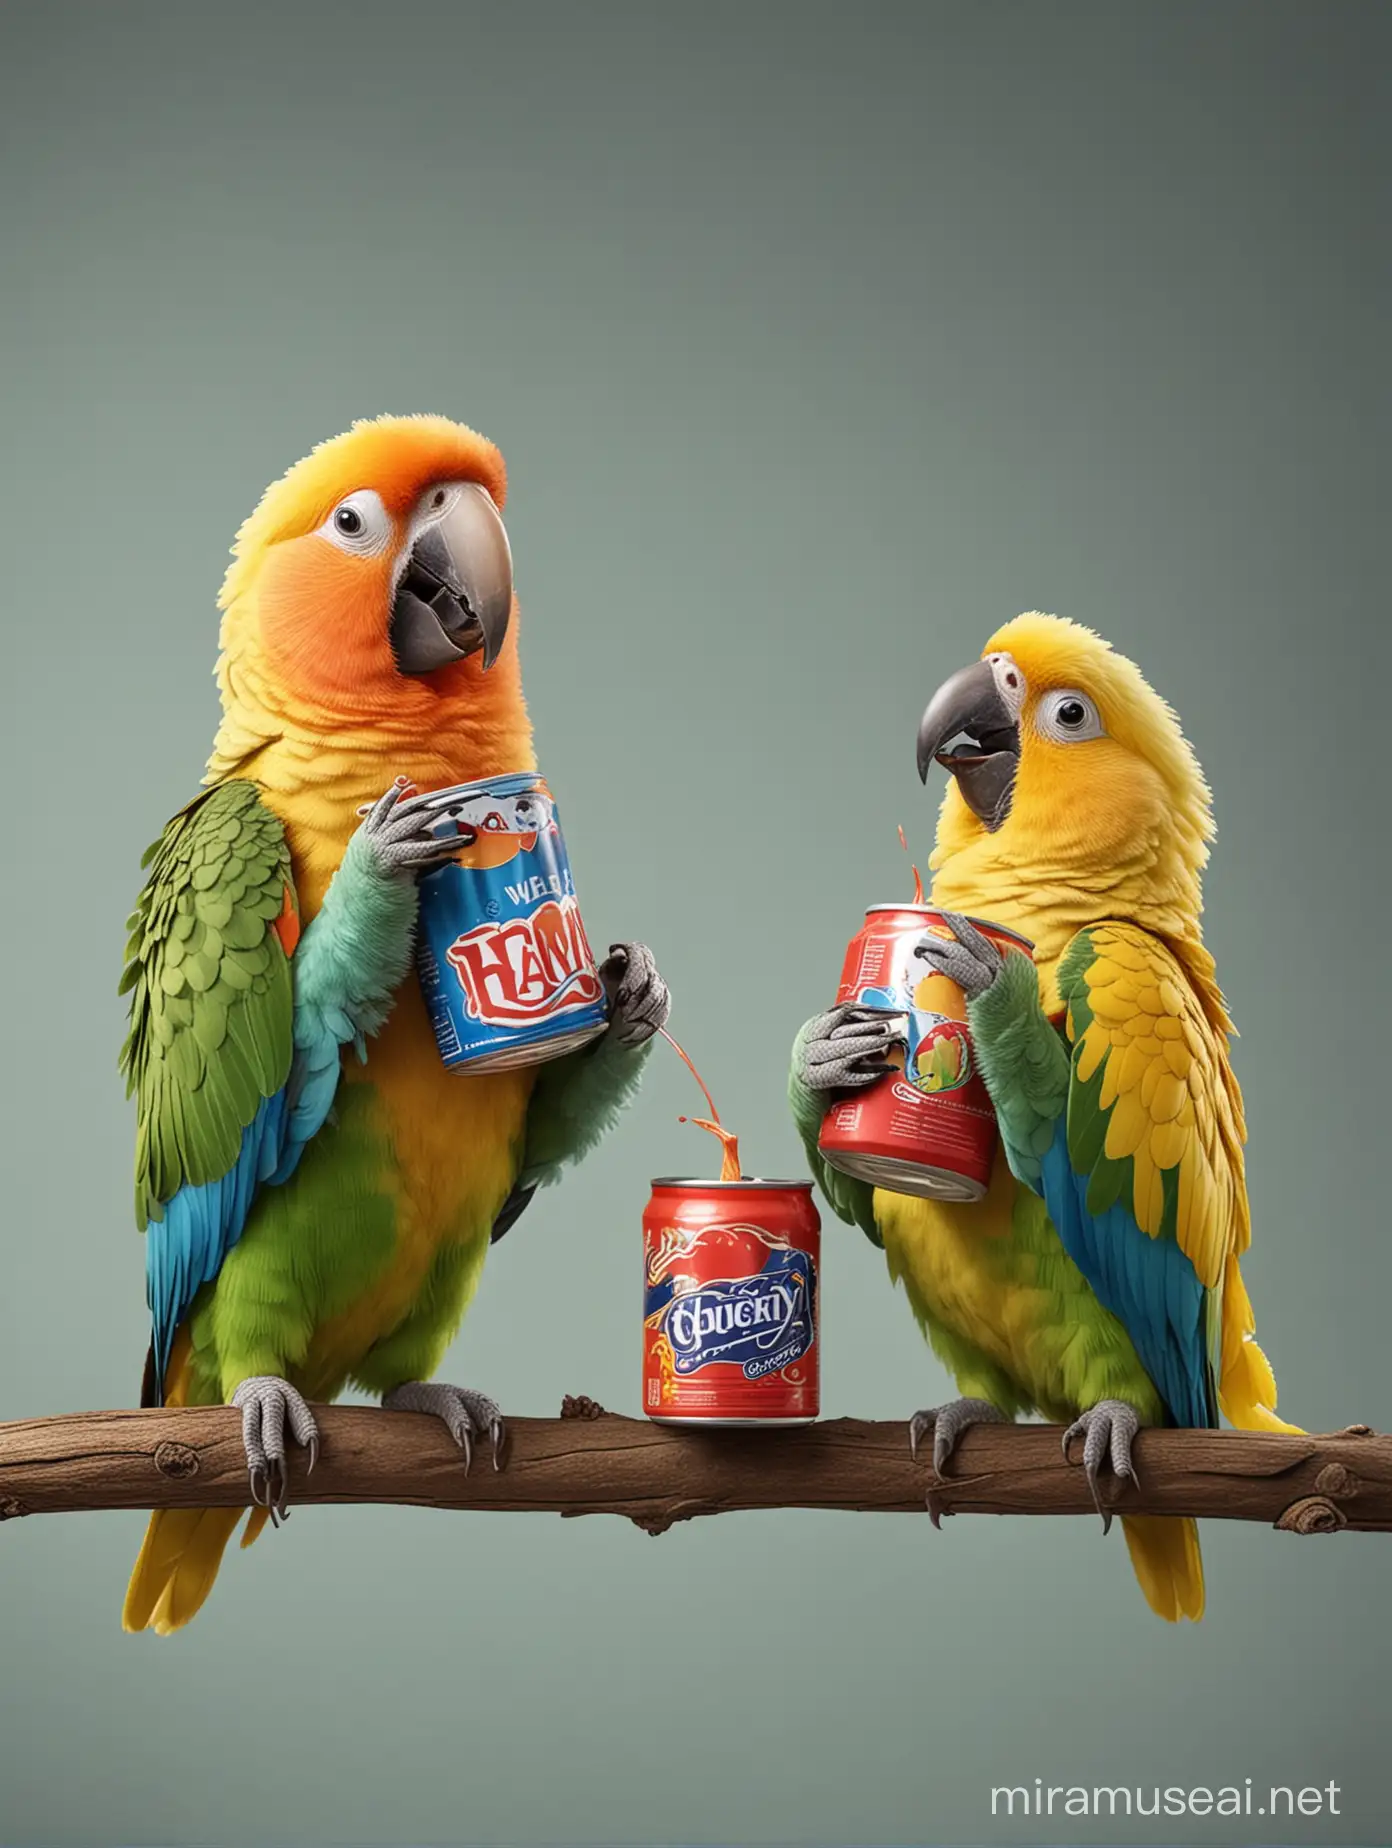 Funny Parrots in Beer Can Costumes Cheering on Branch